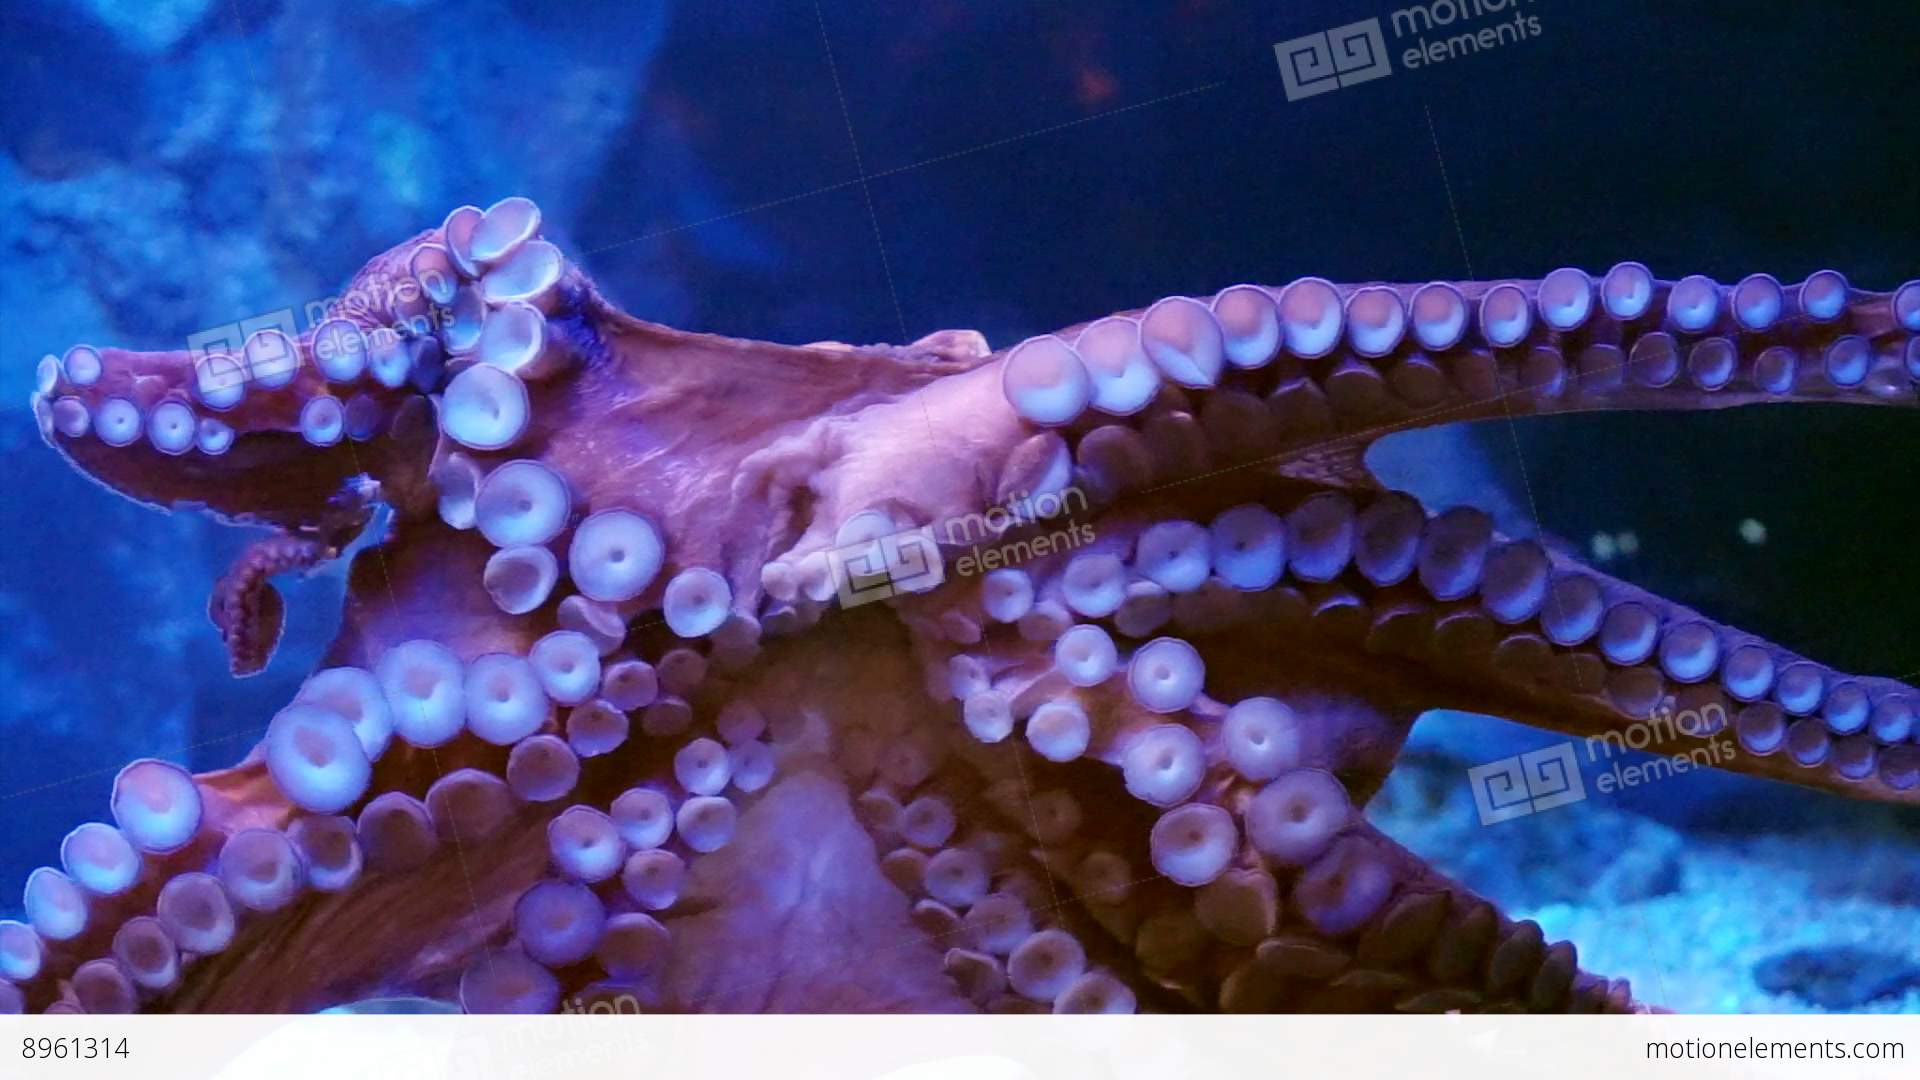 Giant Octopus Spreads Tentacles And Attach On Glass At The Aquarium ...